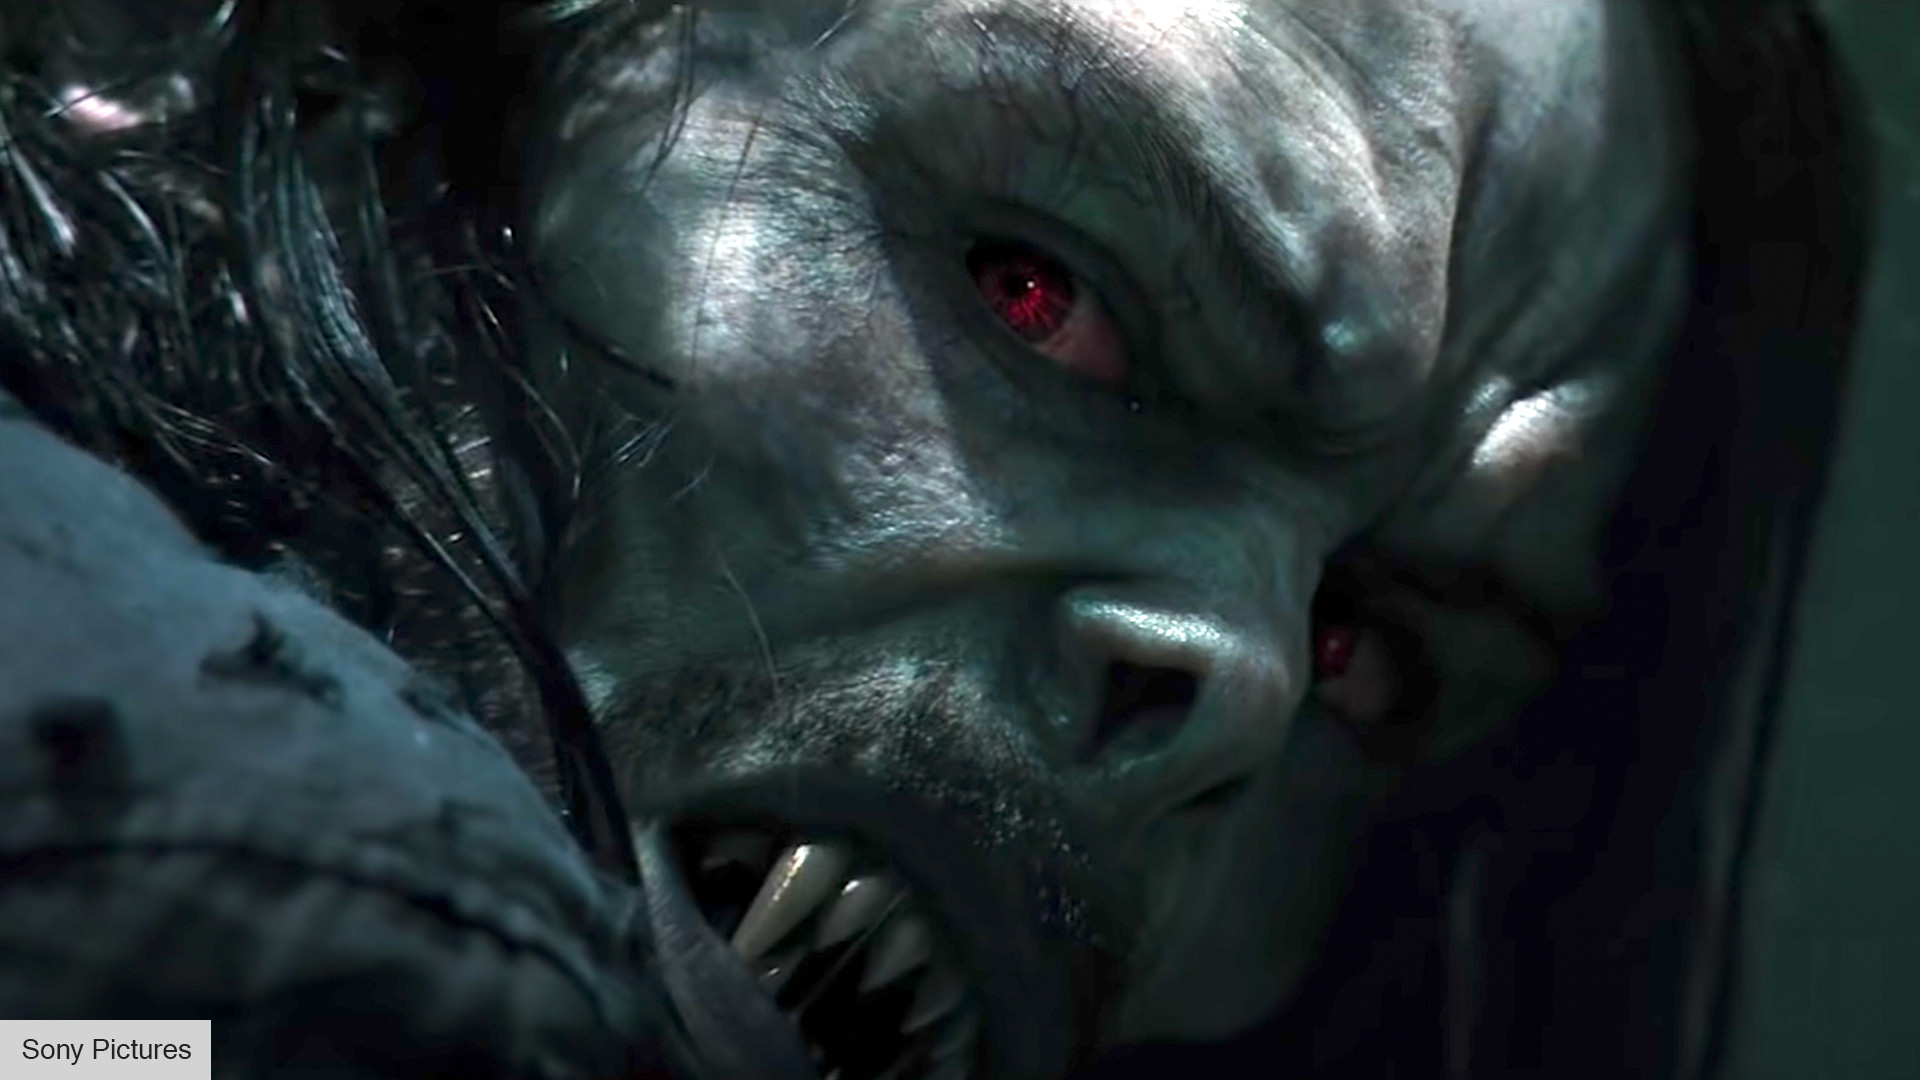 Morbius trailer, release date, and more | The Digital Fix